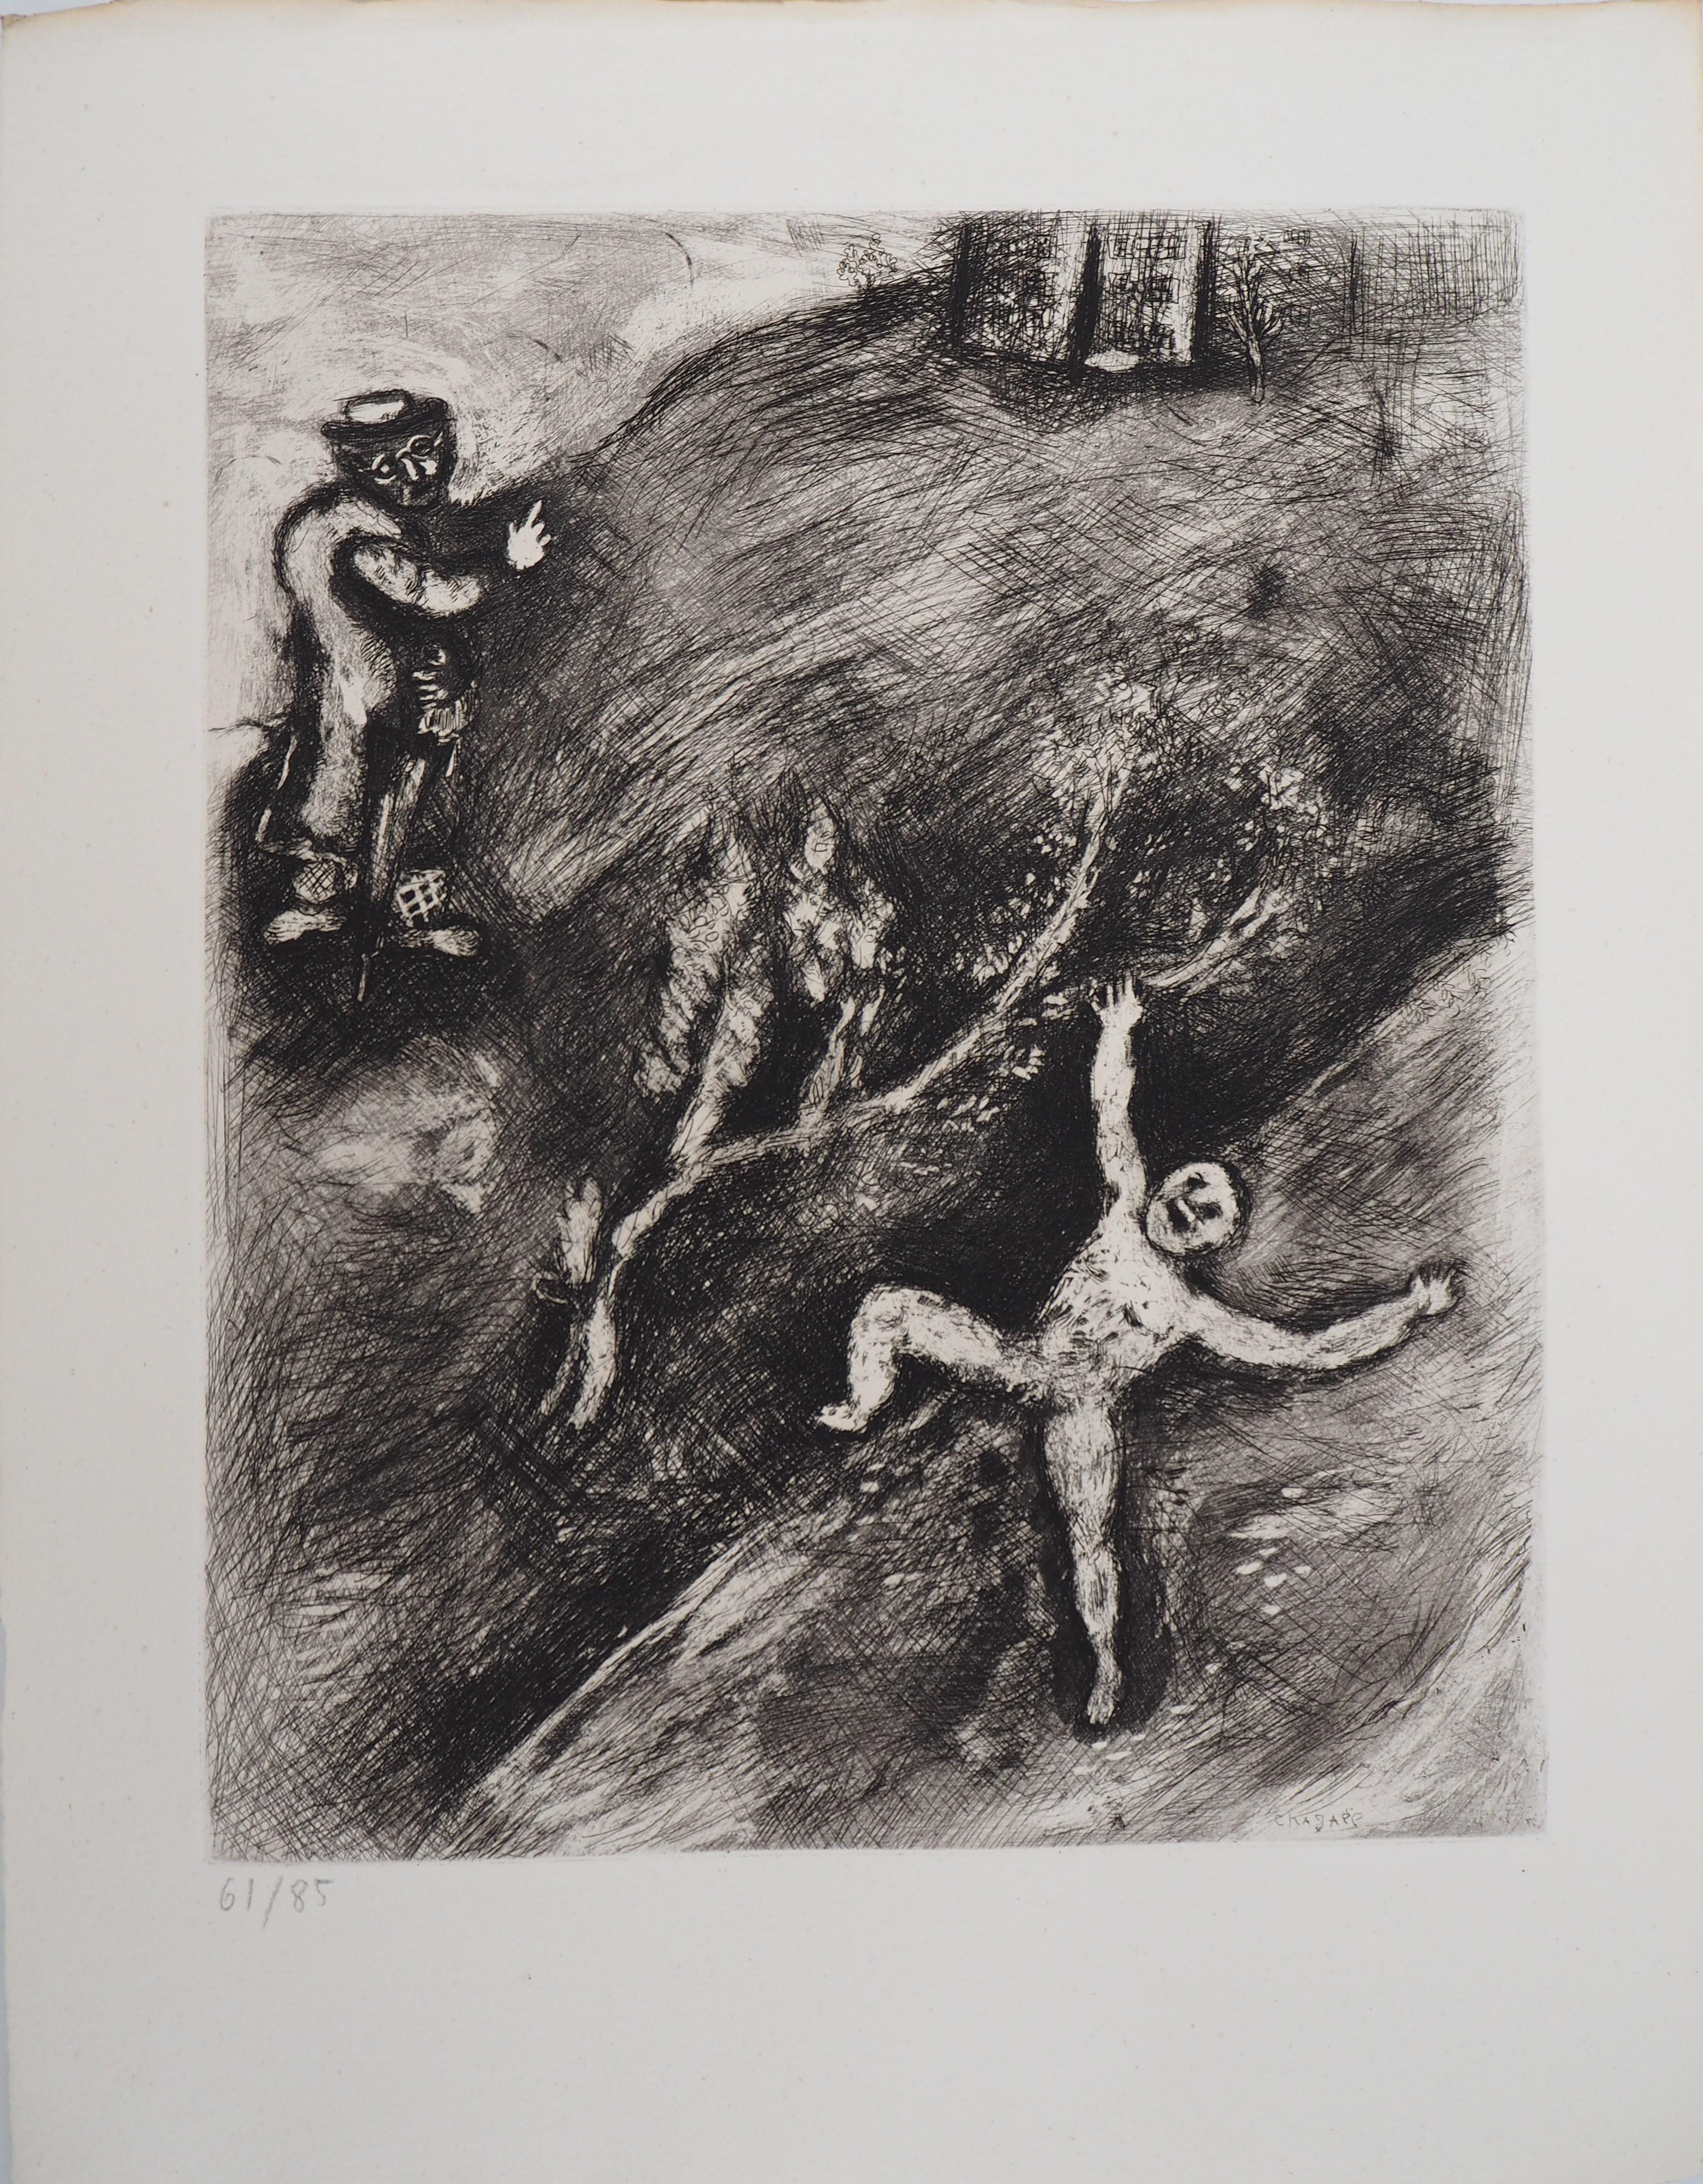 Marc Chagall Animal Print - The Child and The Professor - Original Etching - Ref. Sorlier #104